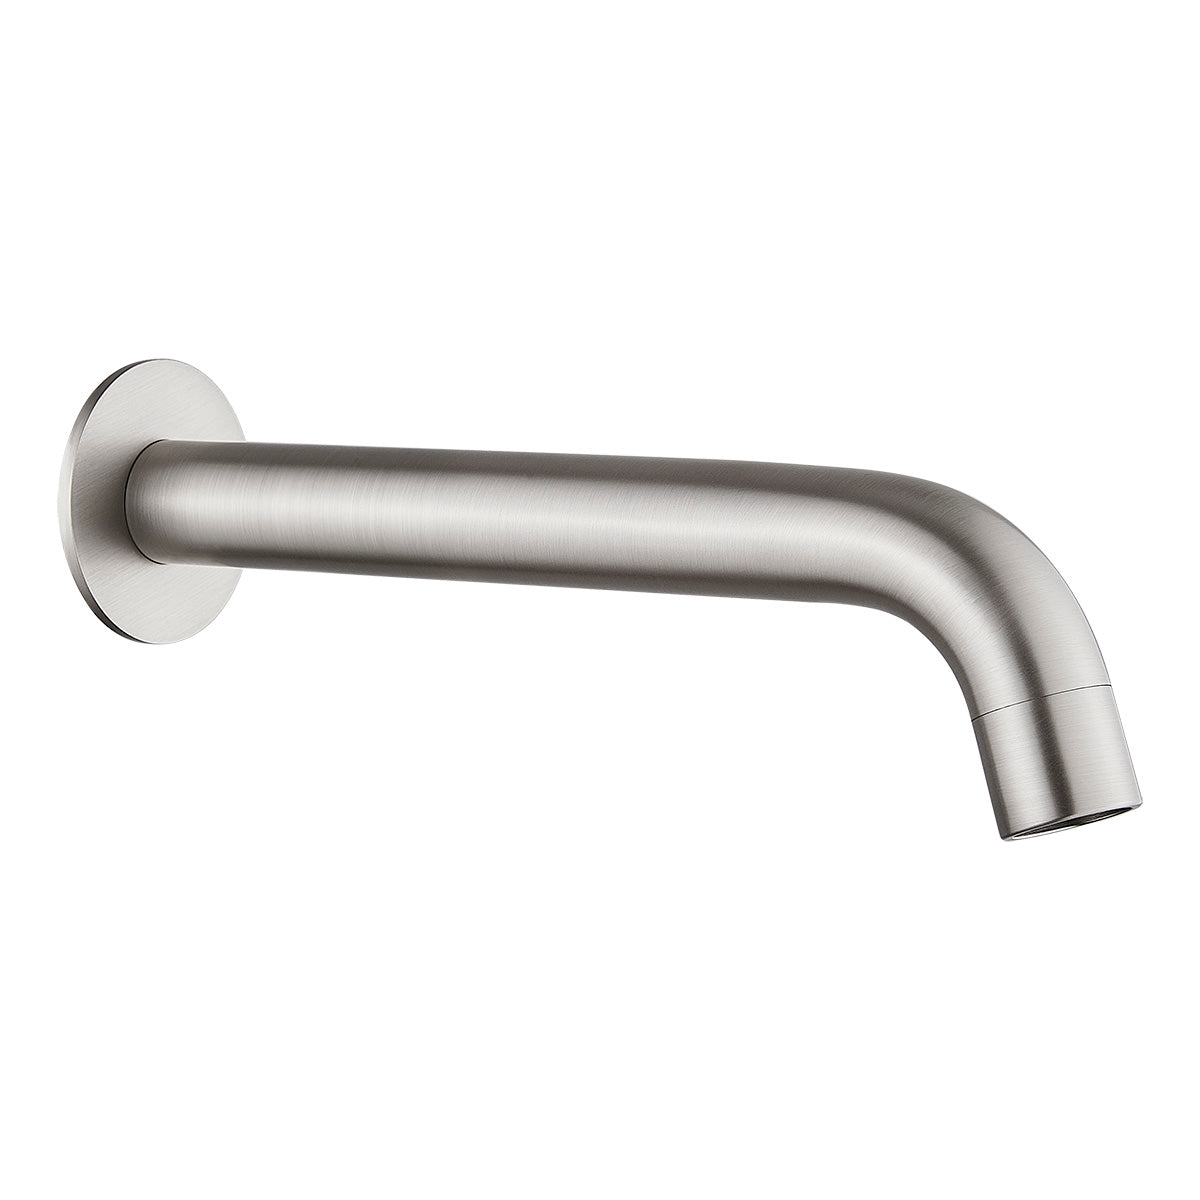 IDCS1 (BN) / Ideal Bath Outlet (Brushed Nickel) 200mm